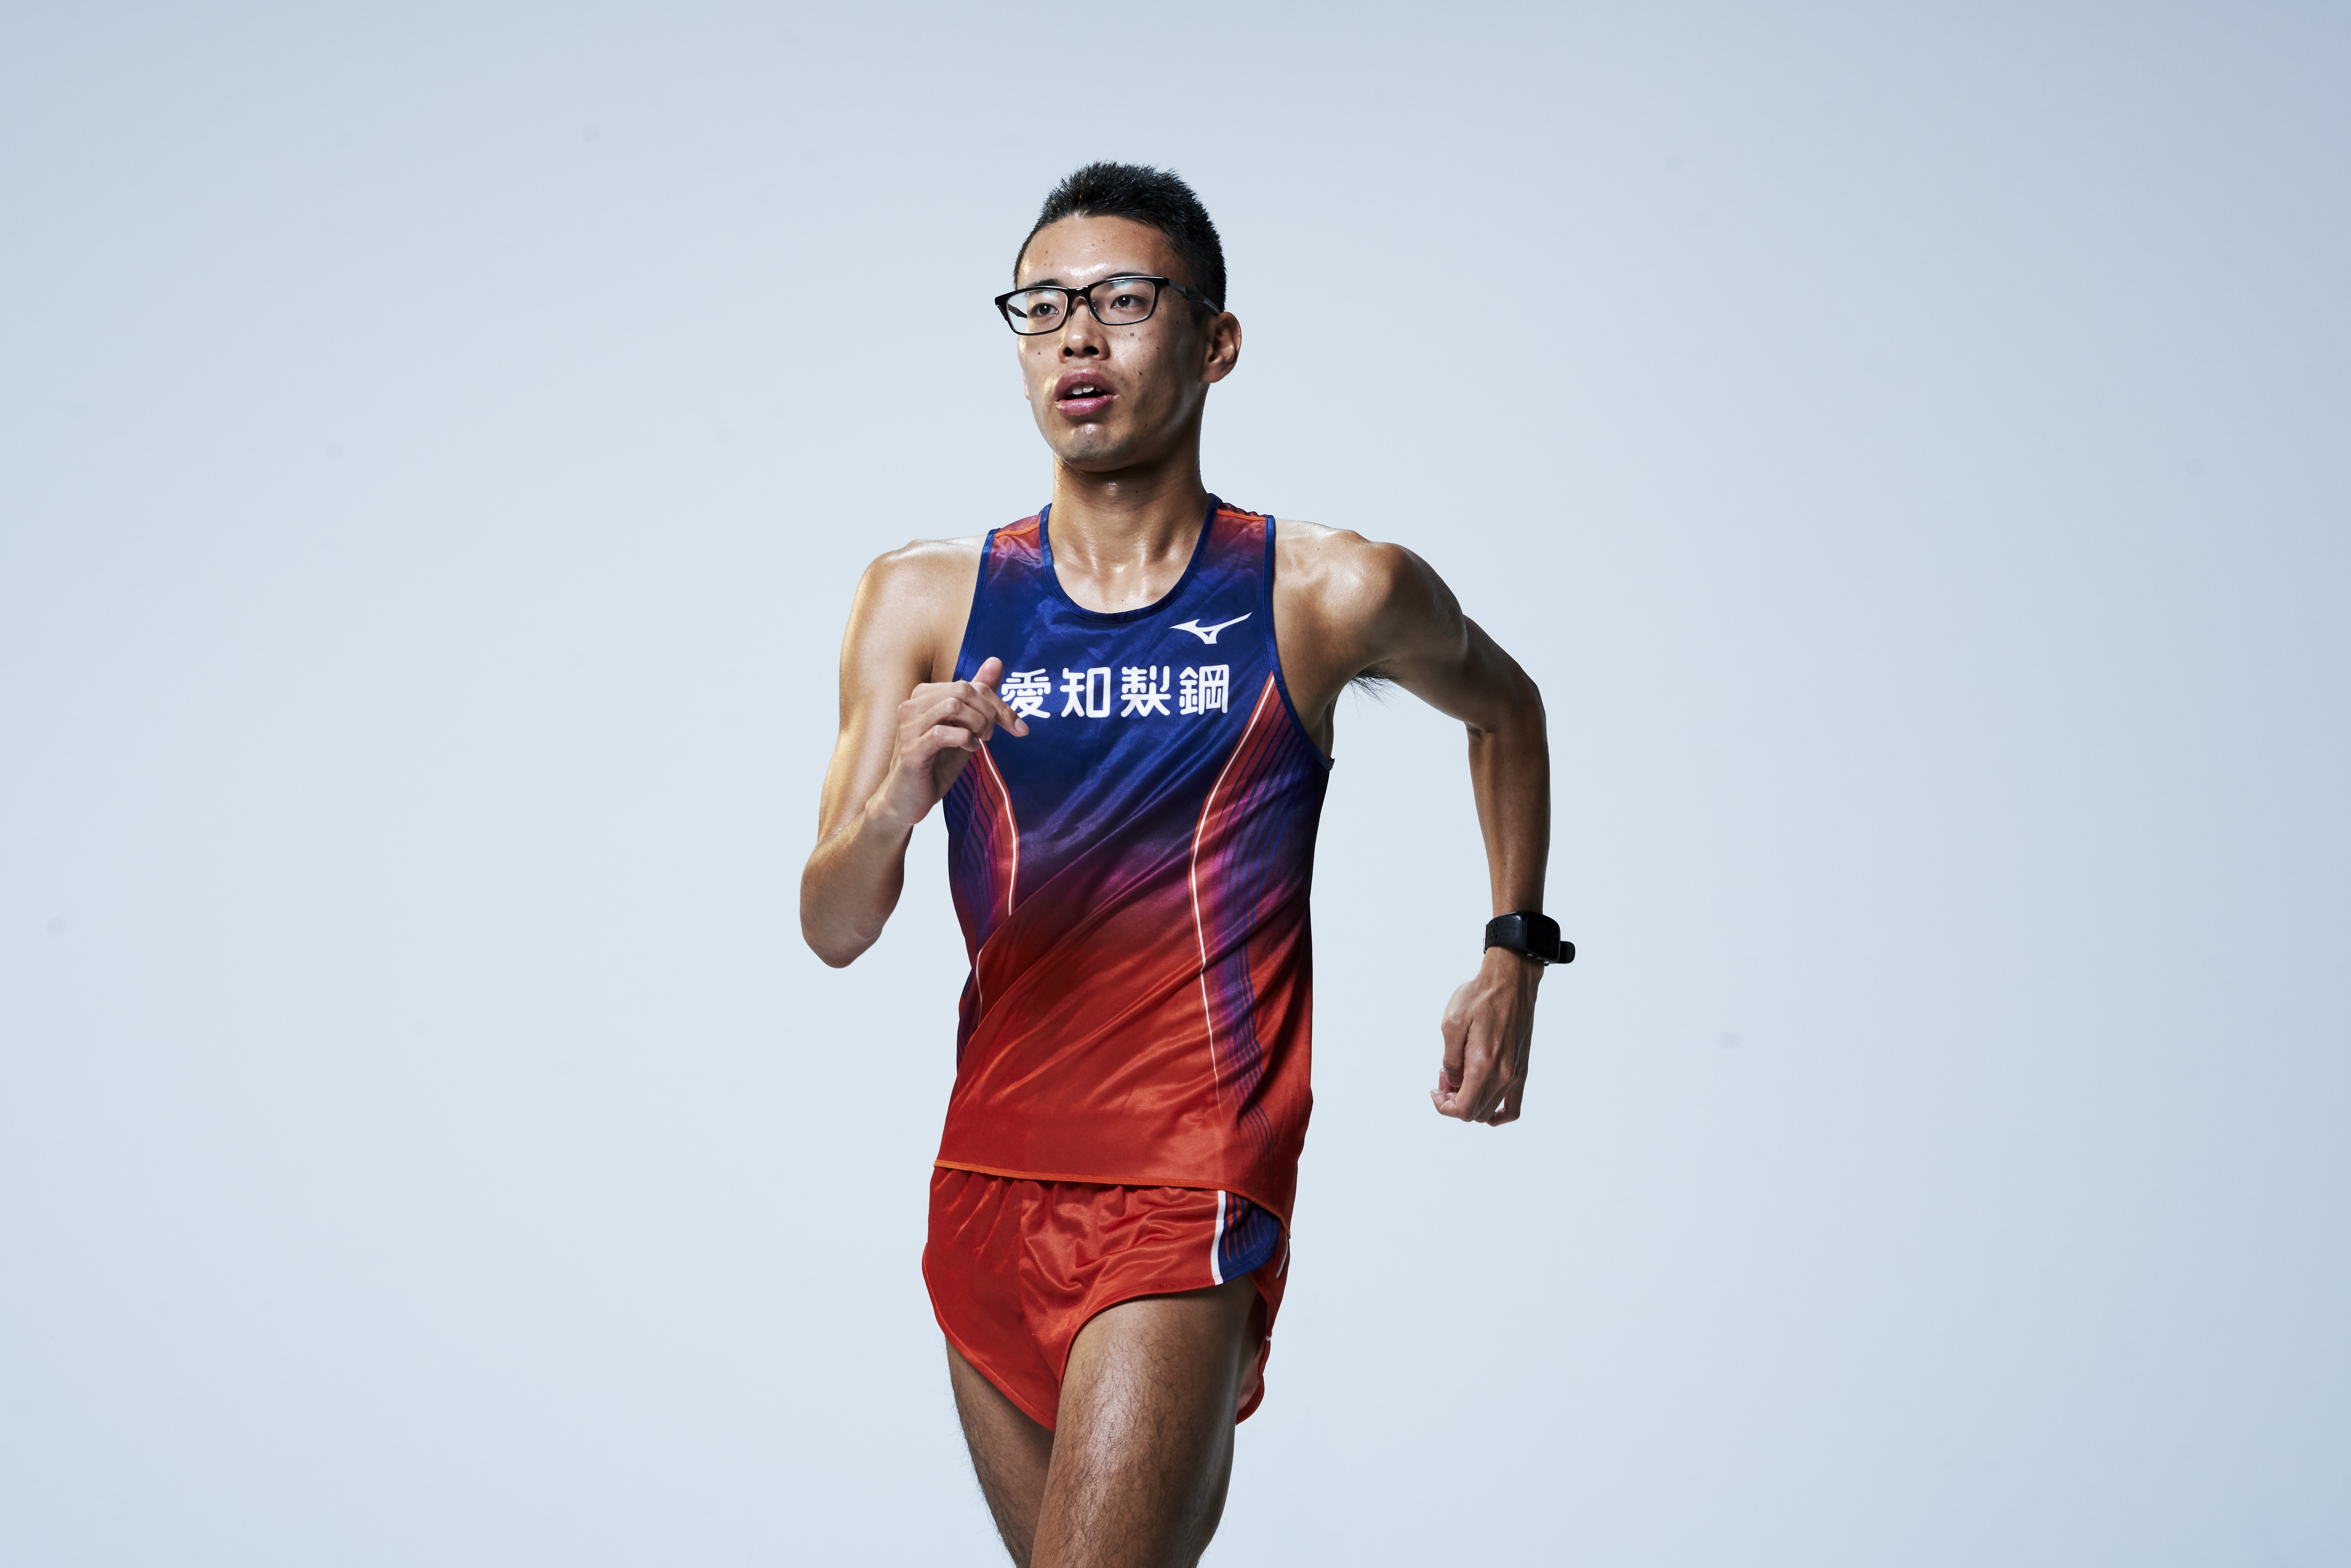 In a first for Japan, Toshikazu Yamanishi won a second consecutive gold medal in the 20 km race walk event at the 2022 World Athletics Championships